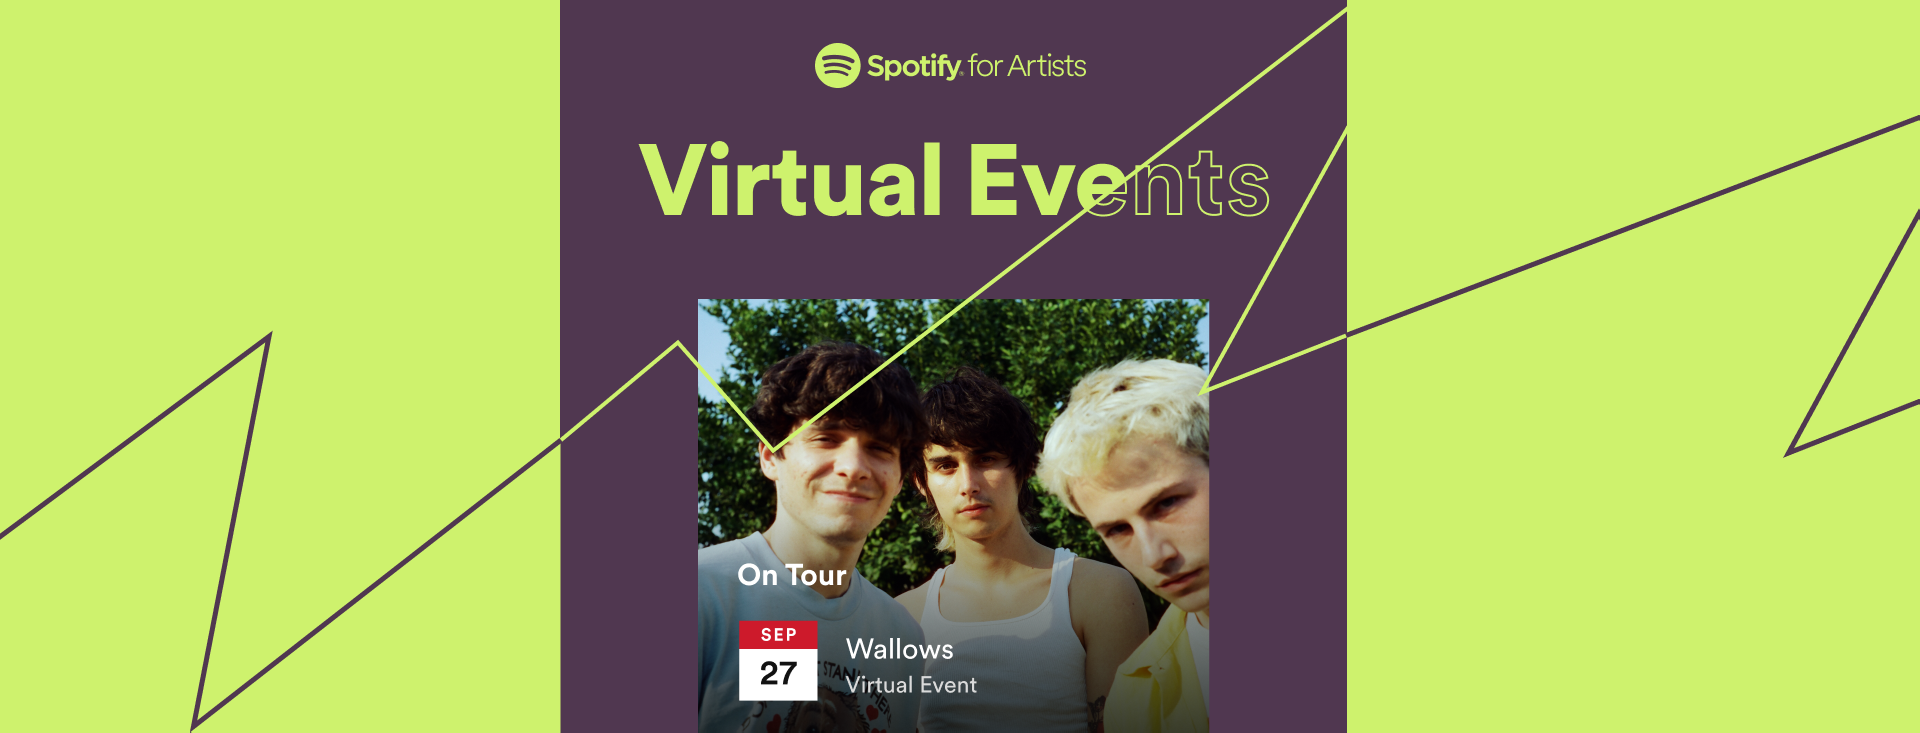 Spotify introduces virtual events listings